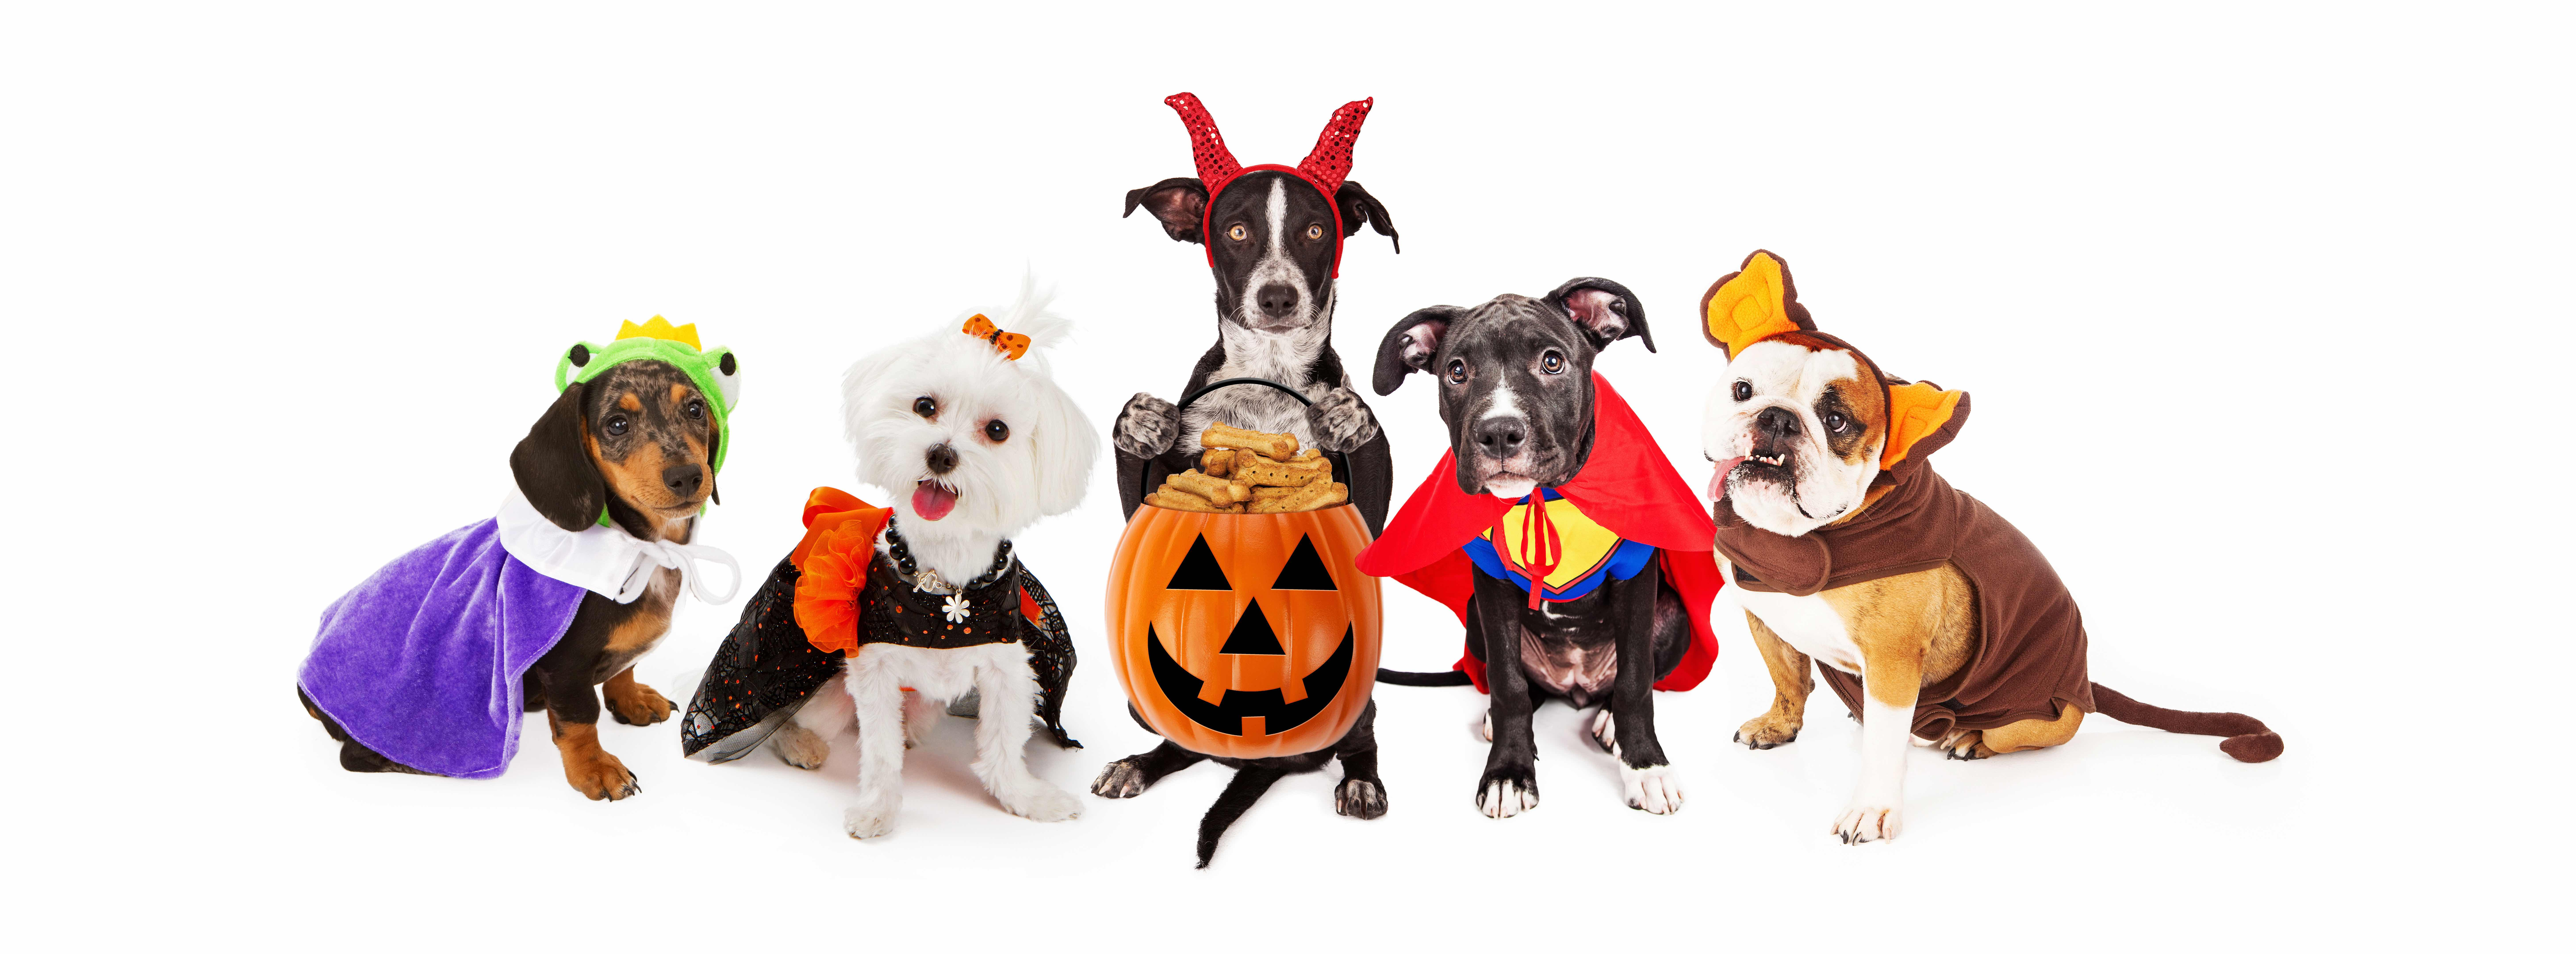 Dogs in halloween costumes